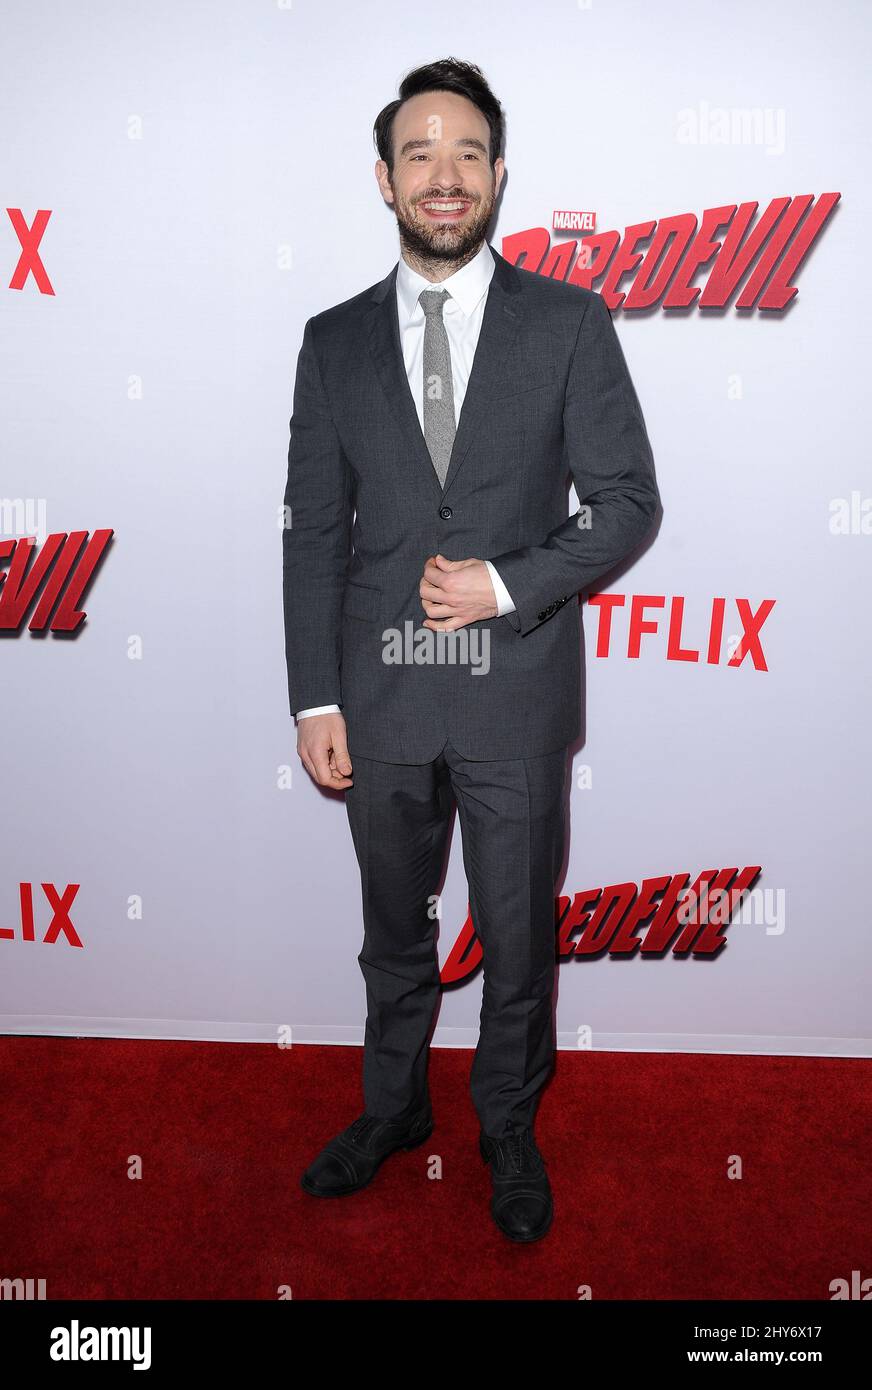 Charlie Cox attending the 'Daredevil' premiere in Los Angeles Stock Photo